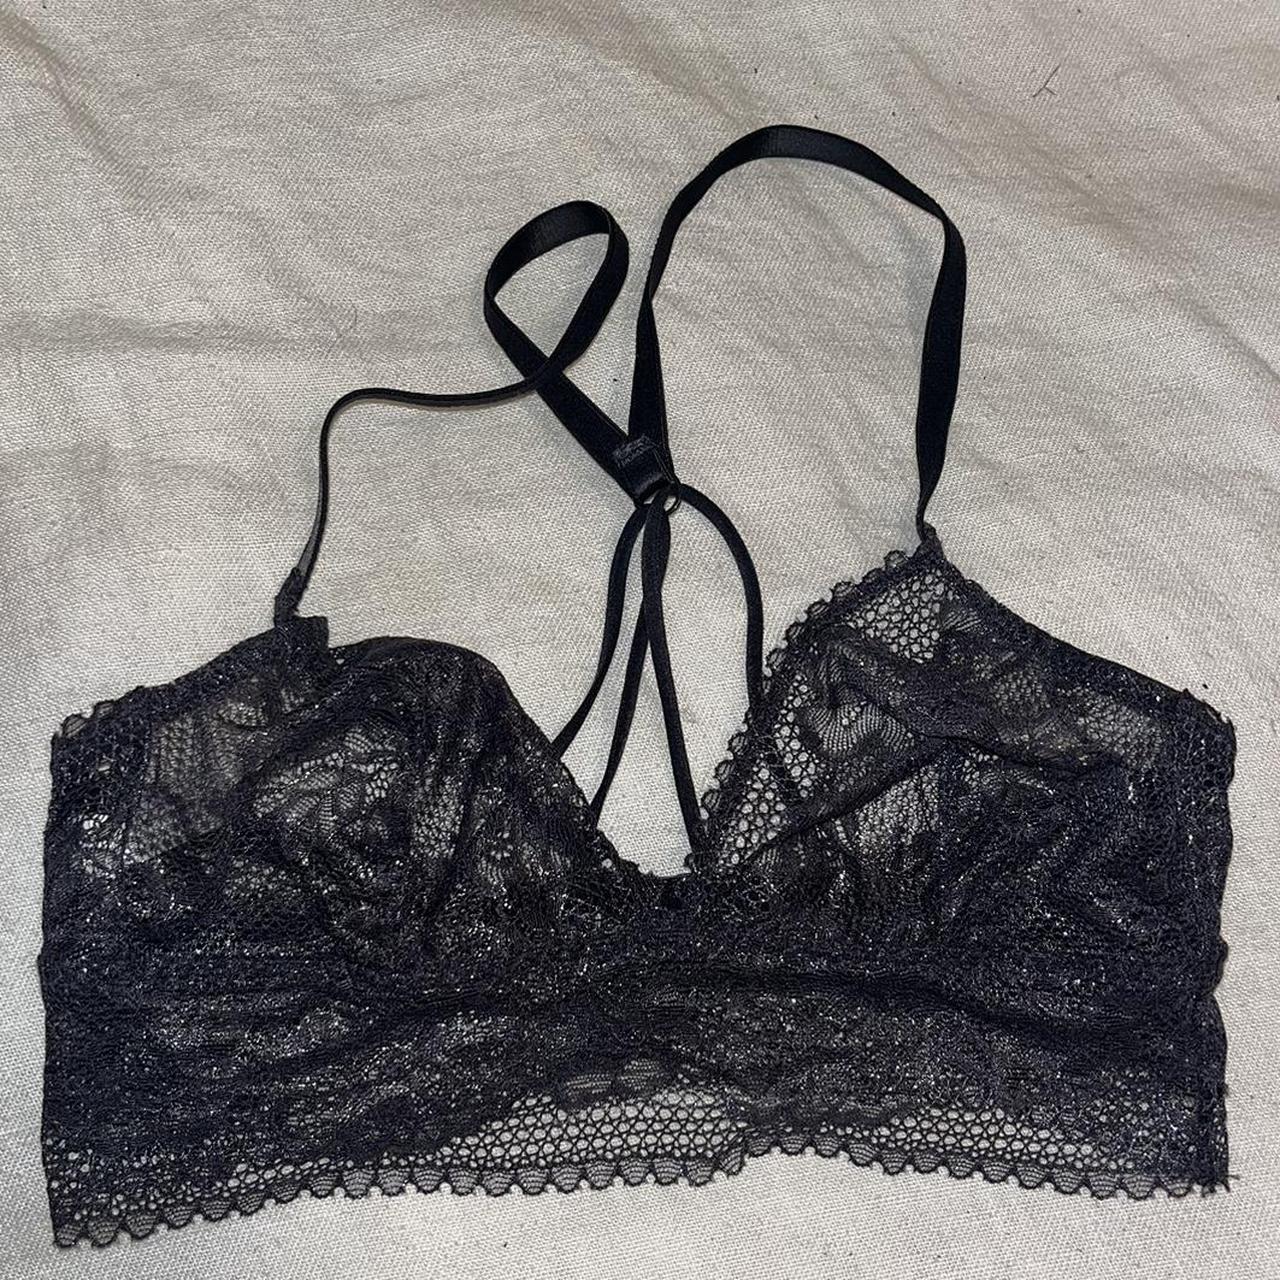 GAP BODY Bralette Top, Can't really see it on the